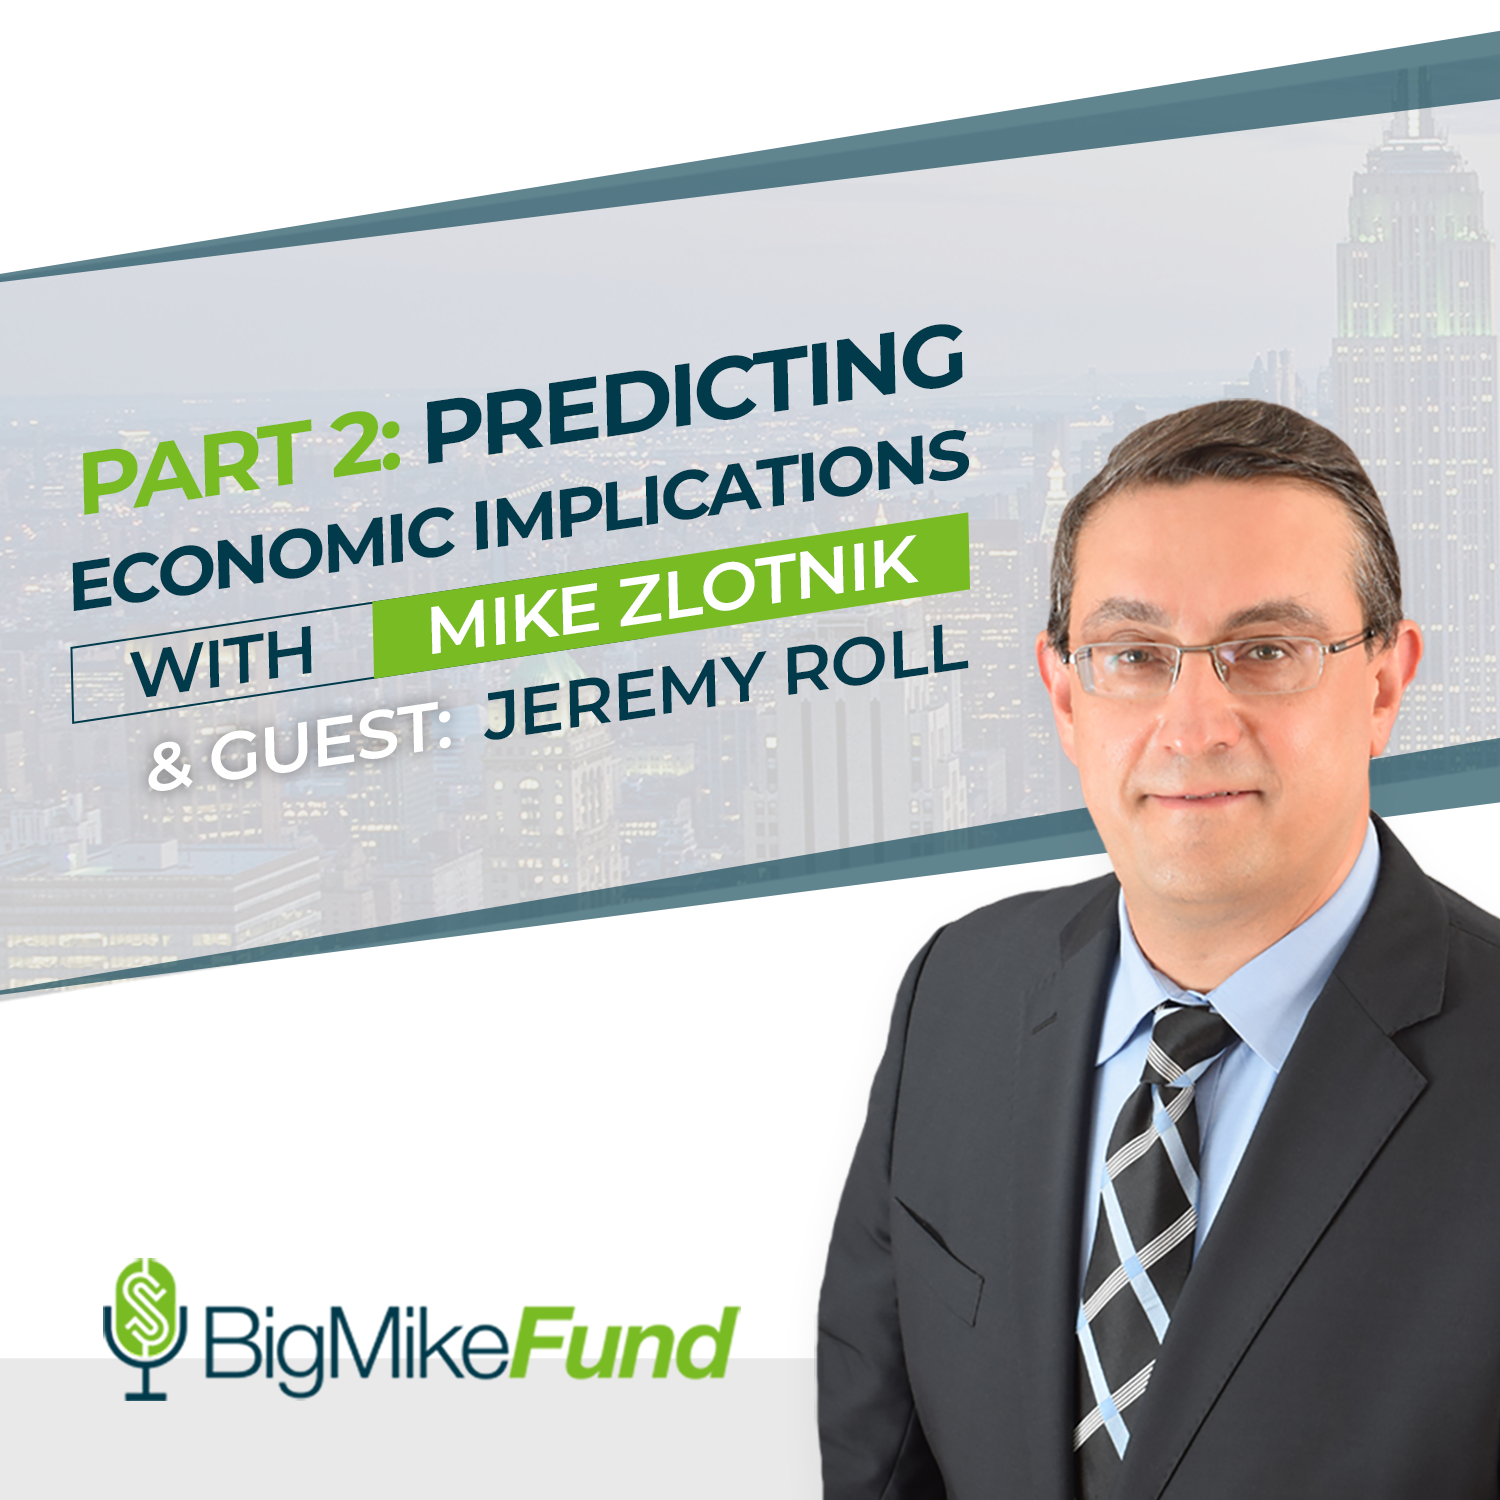 113: Part 2: Predicting Economic Implications with Jeremy Roll